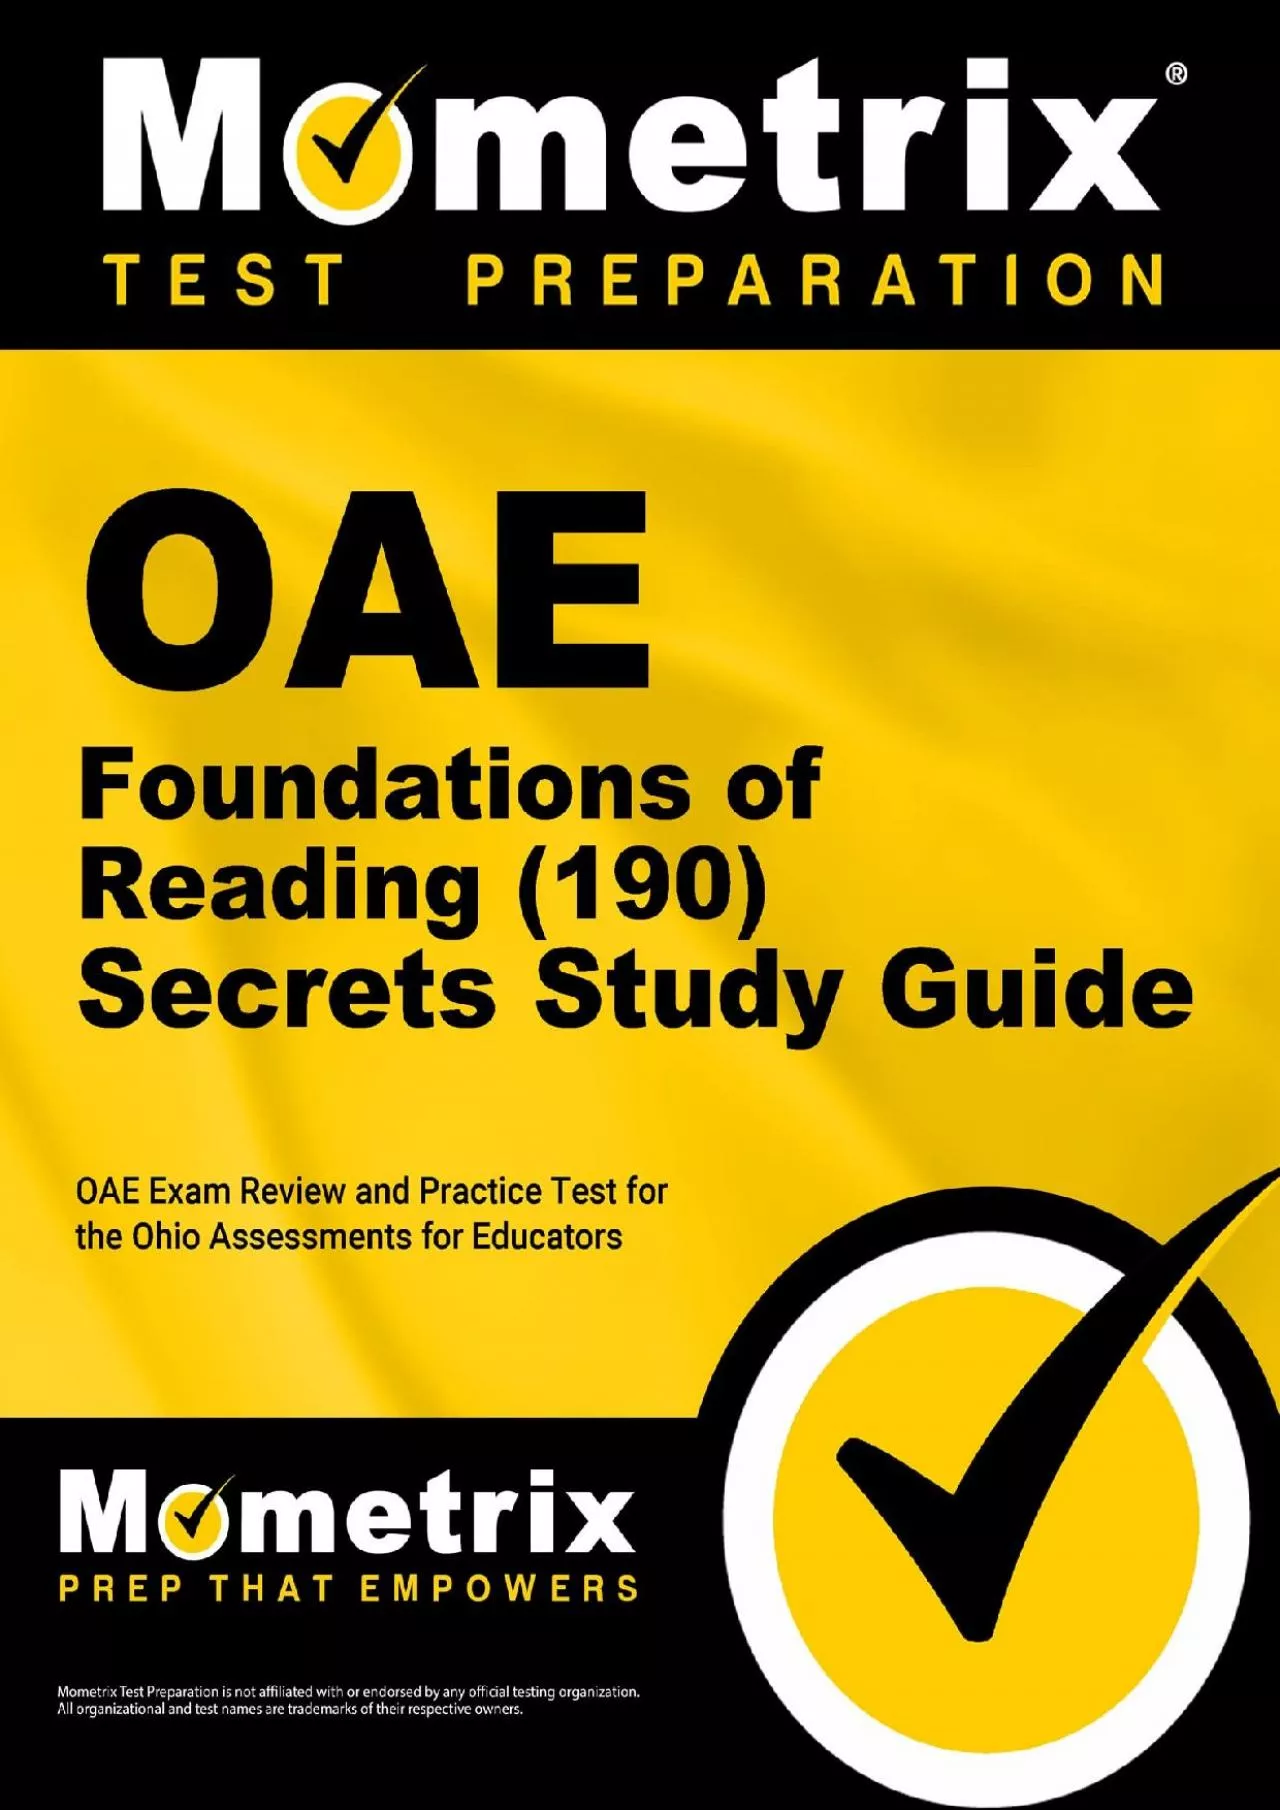 [READ] OAE Foundations of Reading 190 Secrets Study Guide: OAE Exam Review and Practice